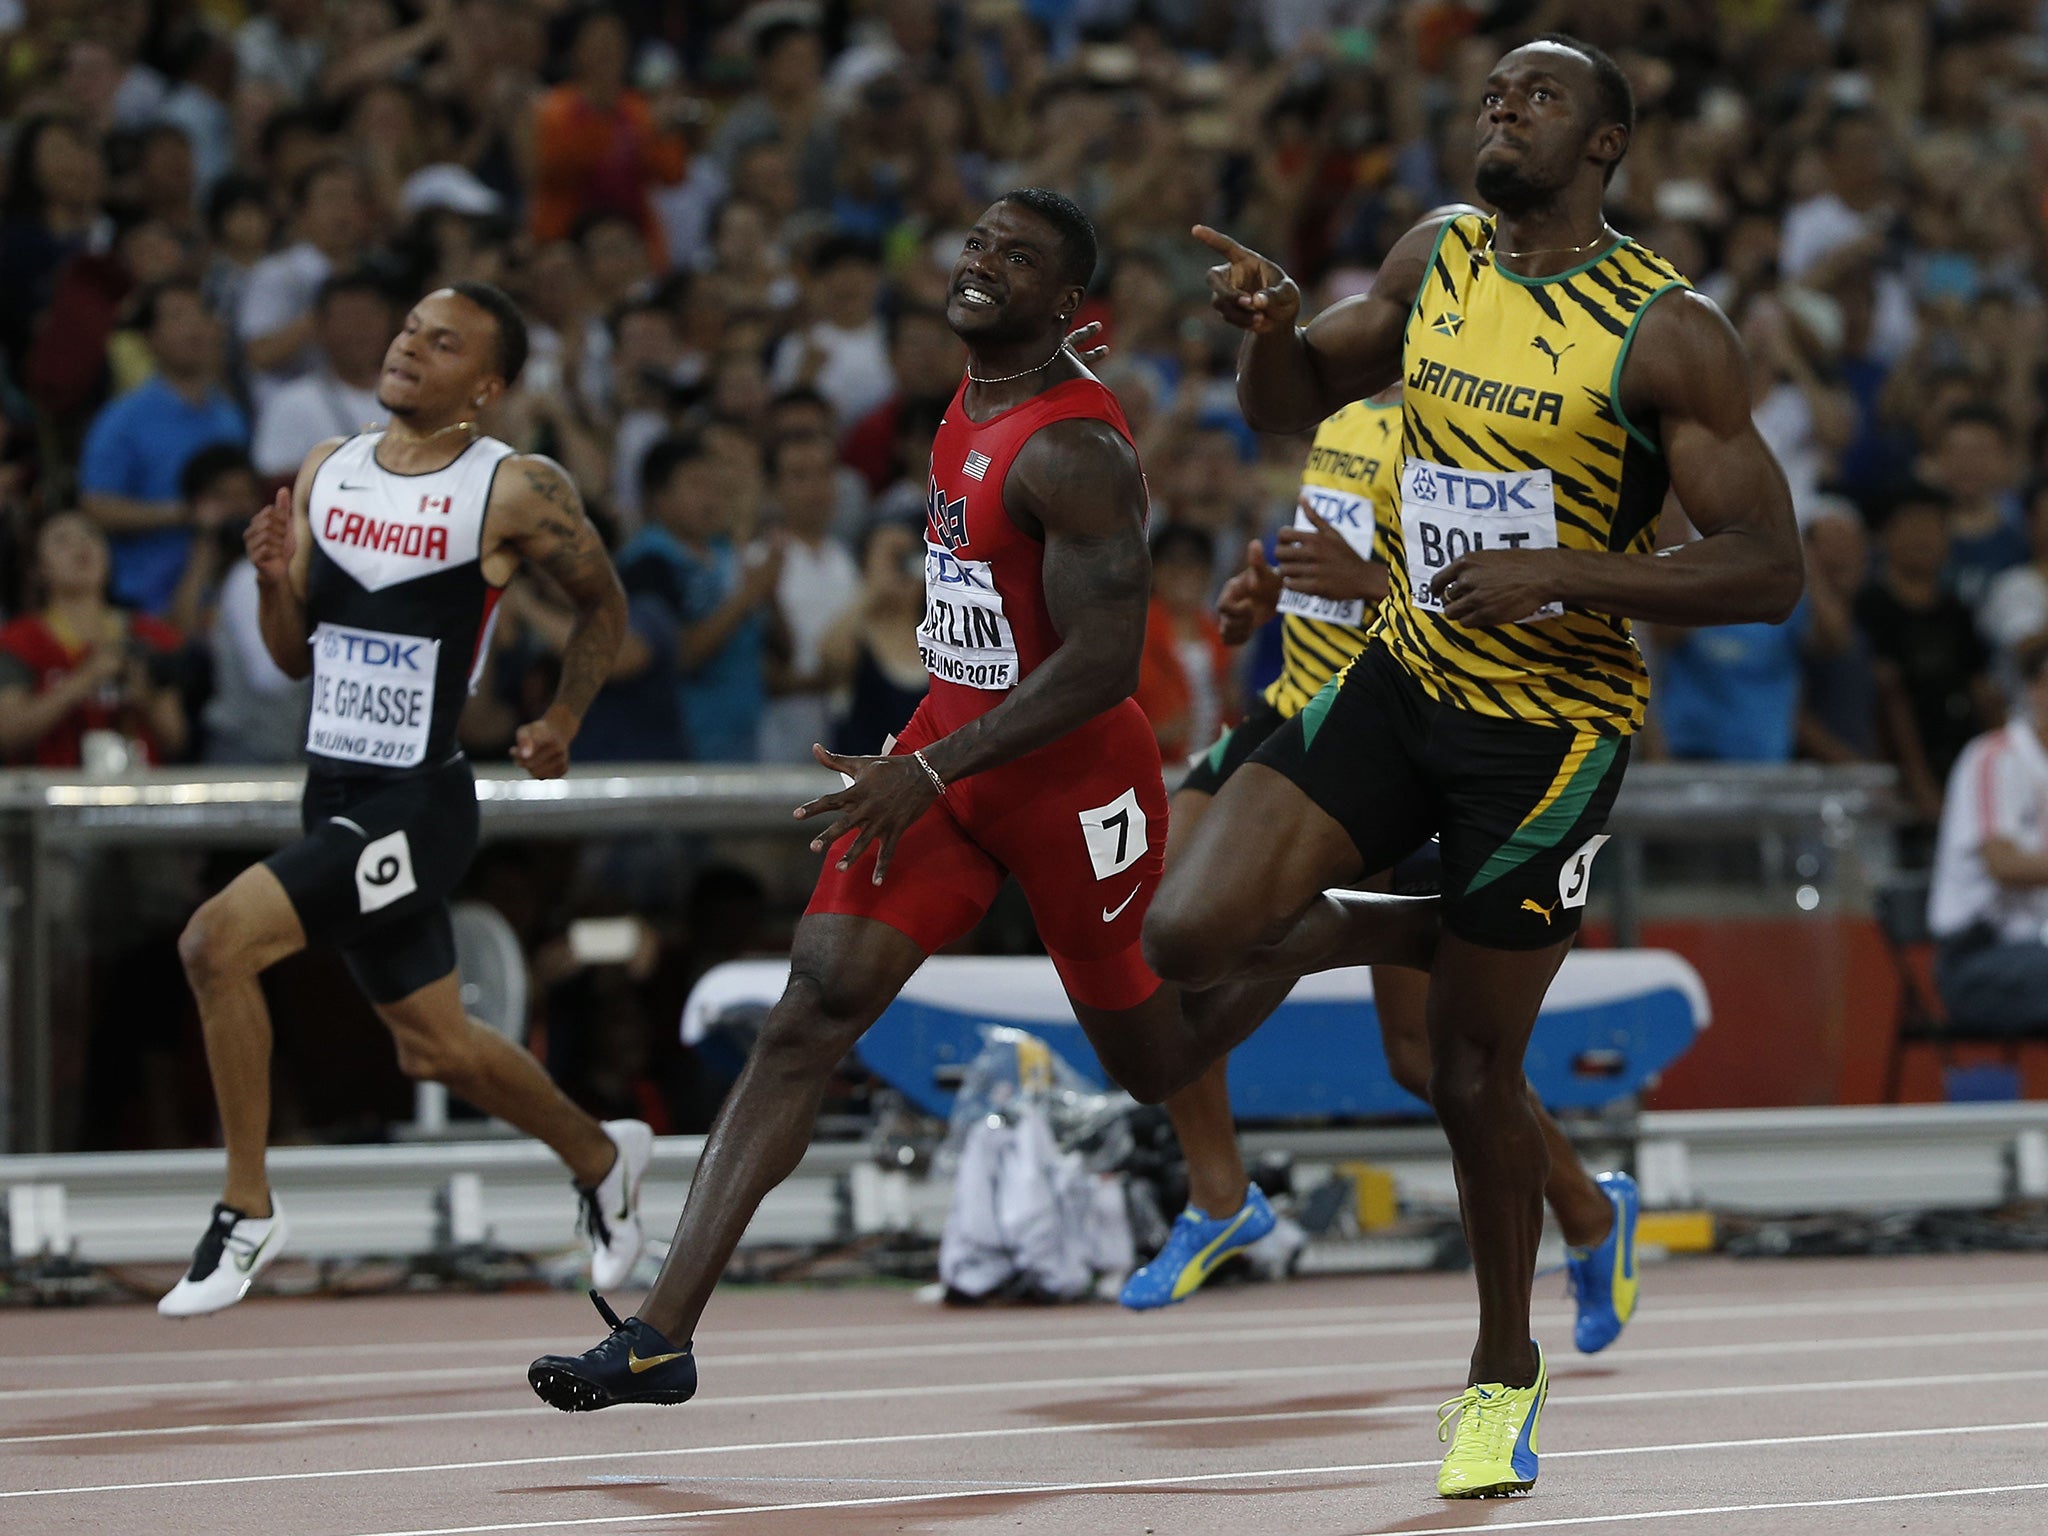 Jamaica's Usain Bolt (R) reacts as he crosses the finish line ahead of USA's Justin Gatlin